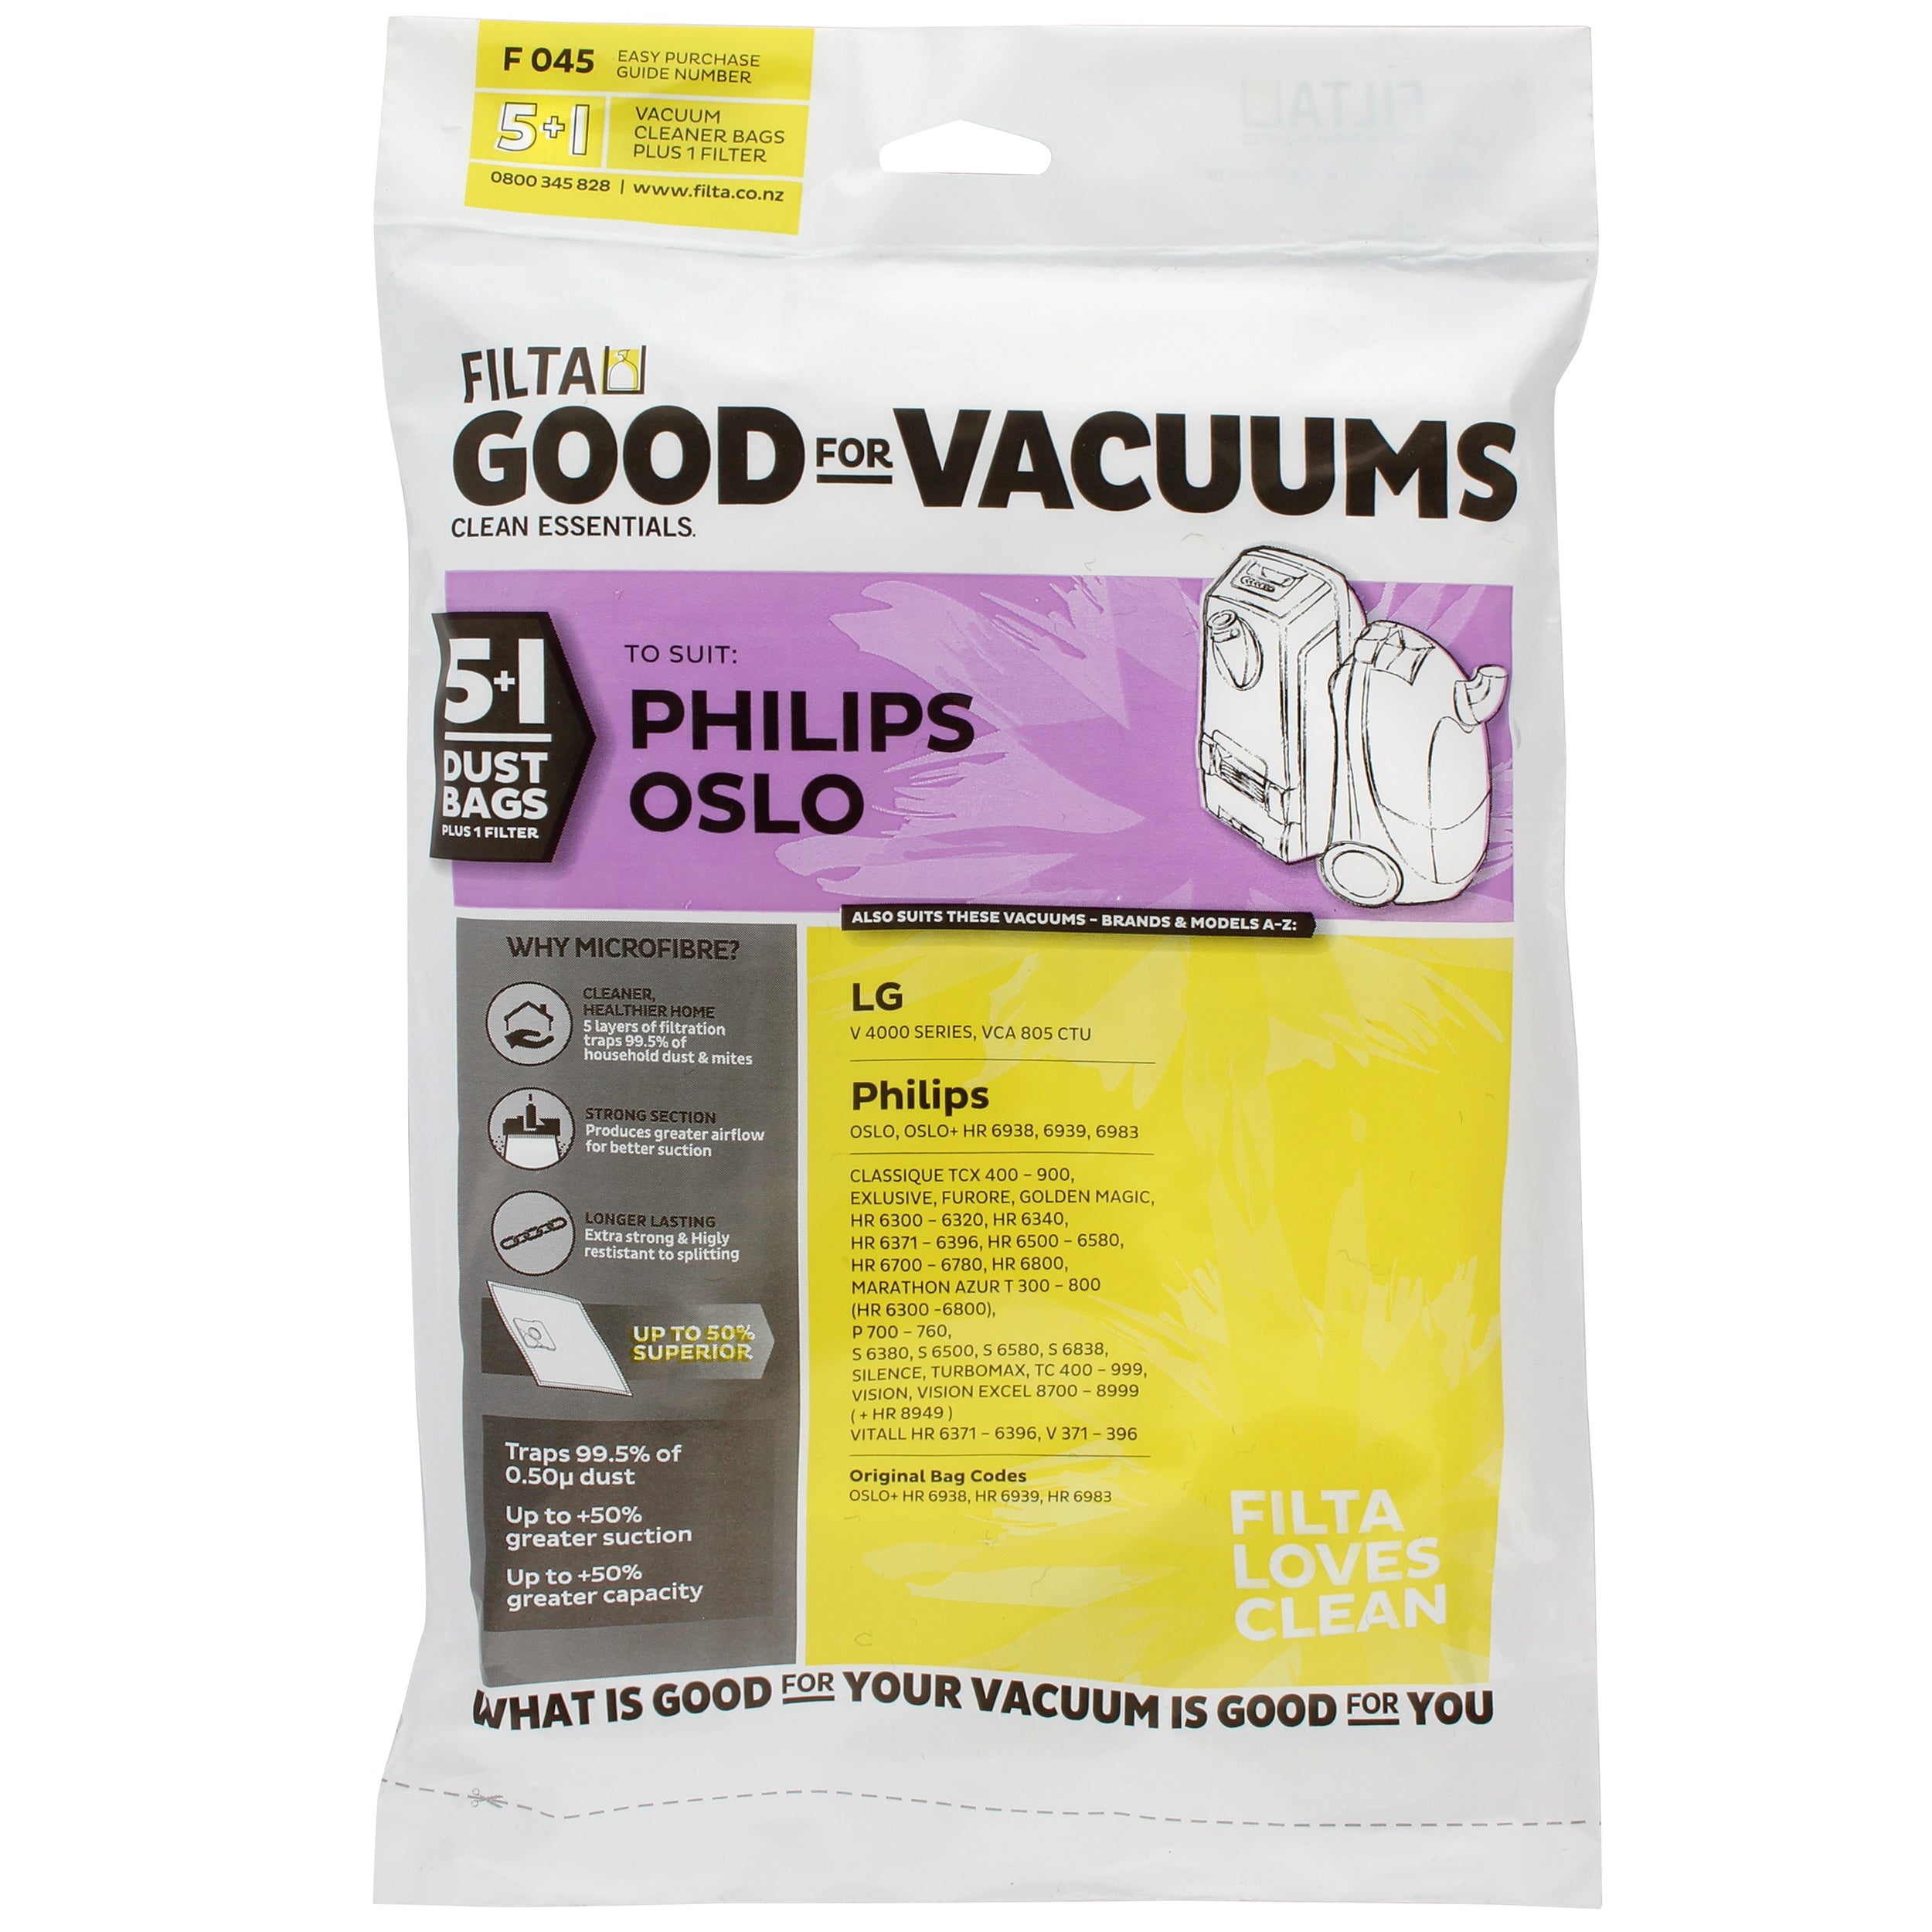 FILTA Philips Oslo Sms Multi Layered Vacuum Cleaner Bags 5 Pack (F045) (60010)